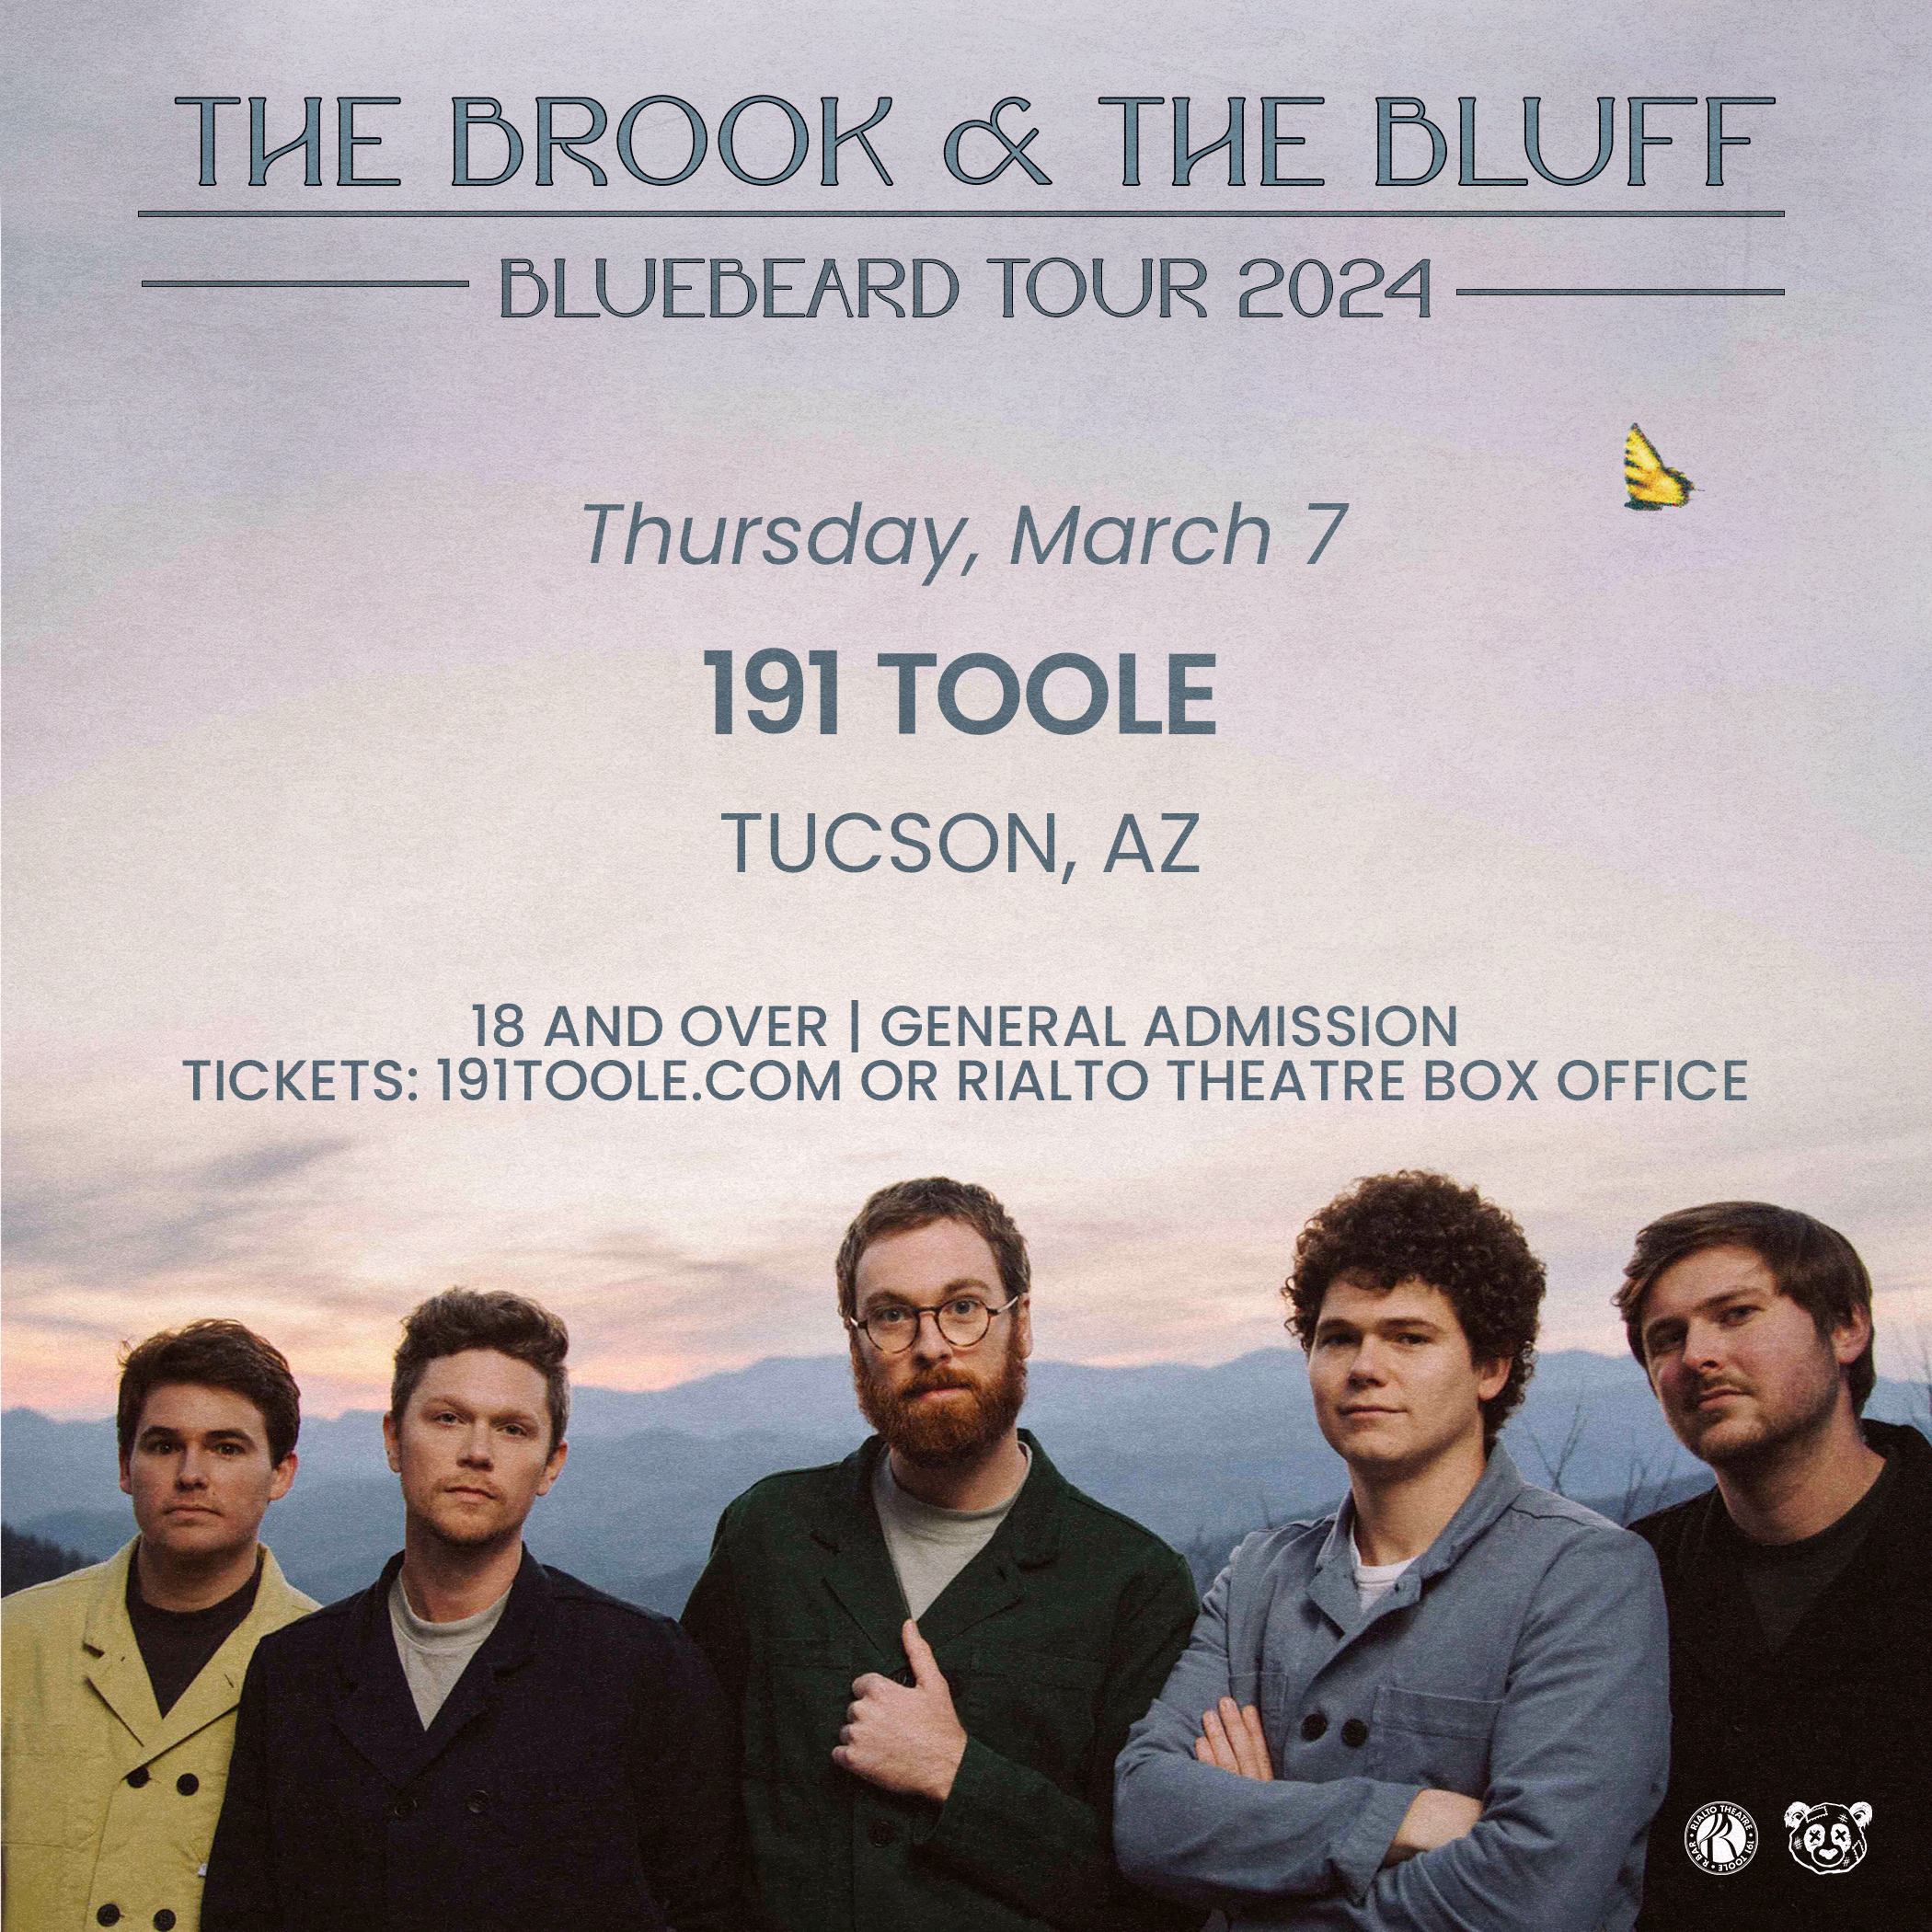 THE BROOK & THE BLUFF191 Toole